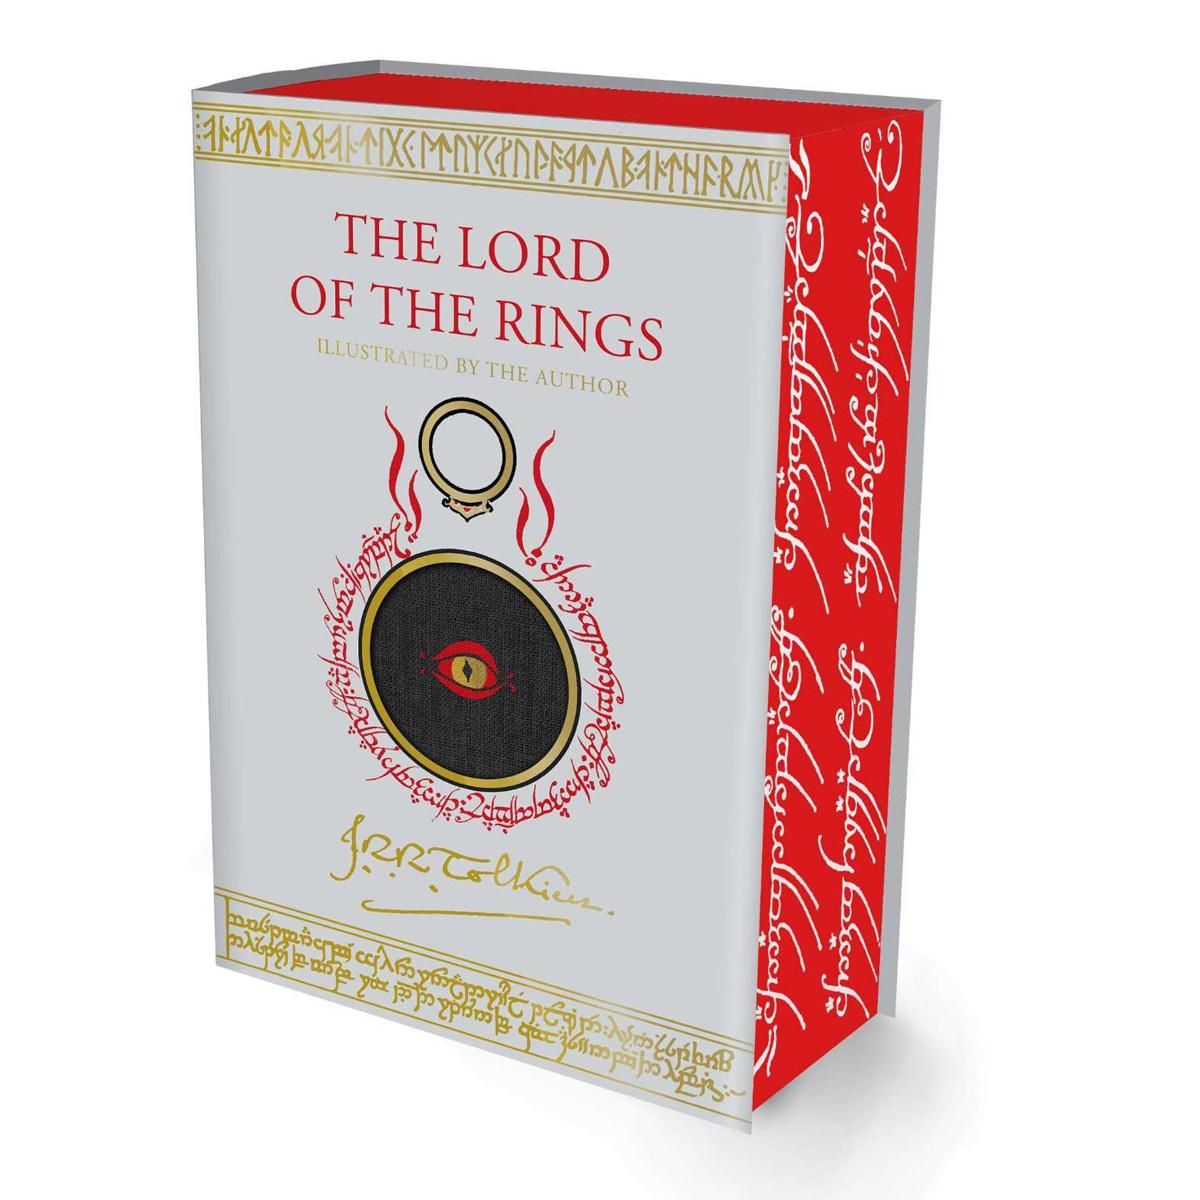 The Lord of the Rings Illustrated Edition Book for $45 Shipped